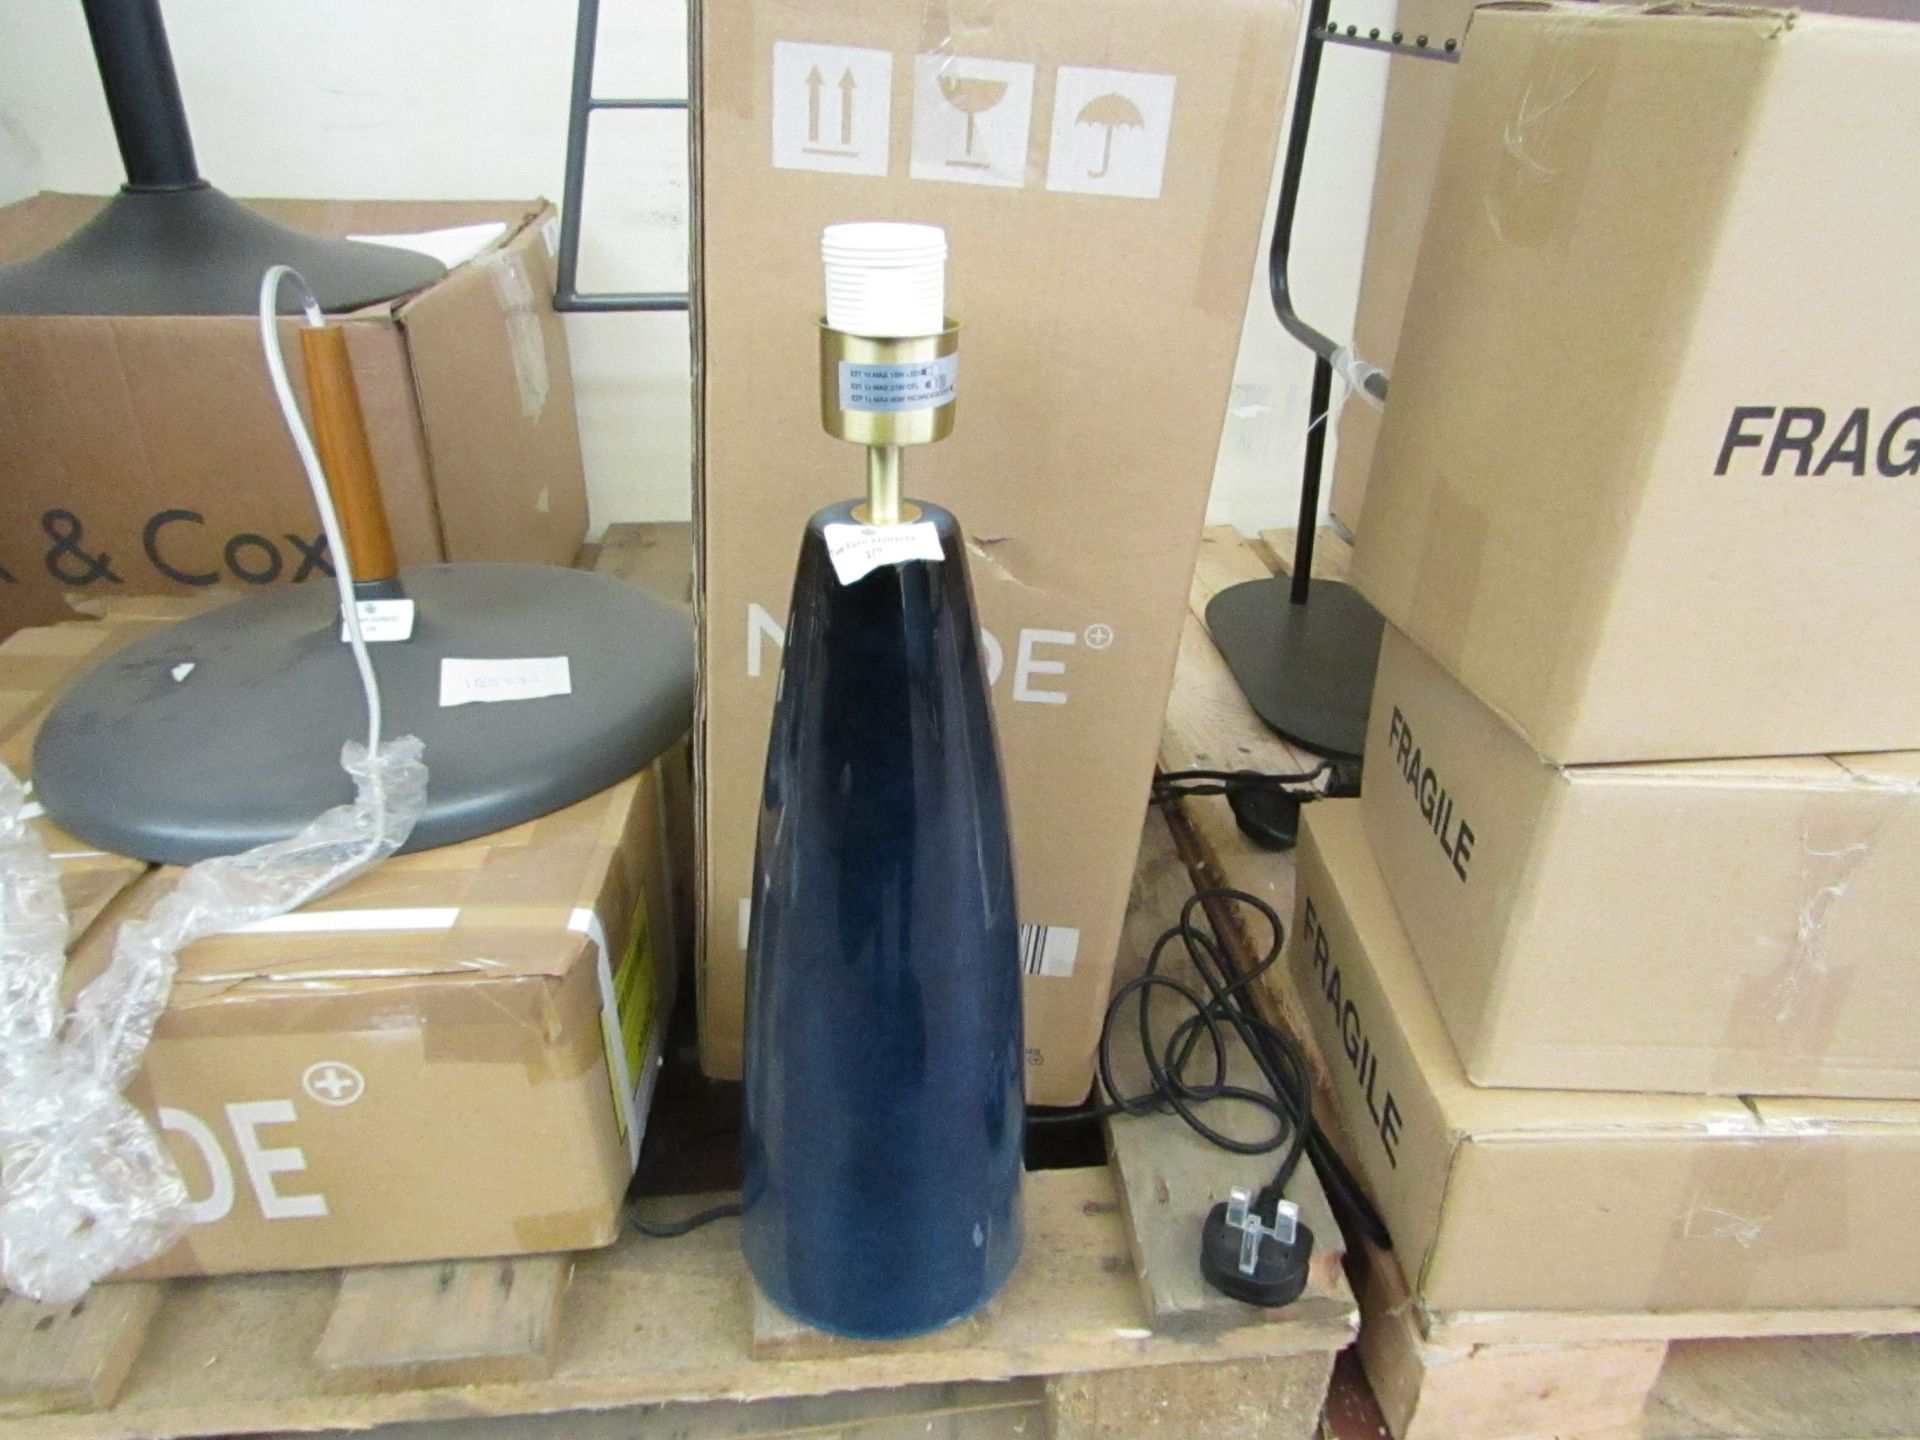 1 x Made.com Vince Table Lamp Base Blue RRP £55 SKU MAD-TLPVIN002BLU-UK TOTAL RRP £55 This lot is